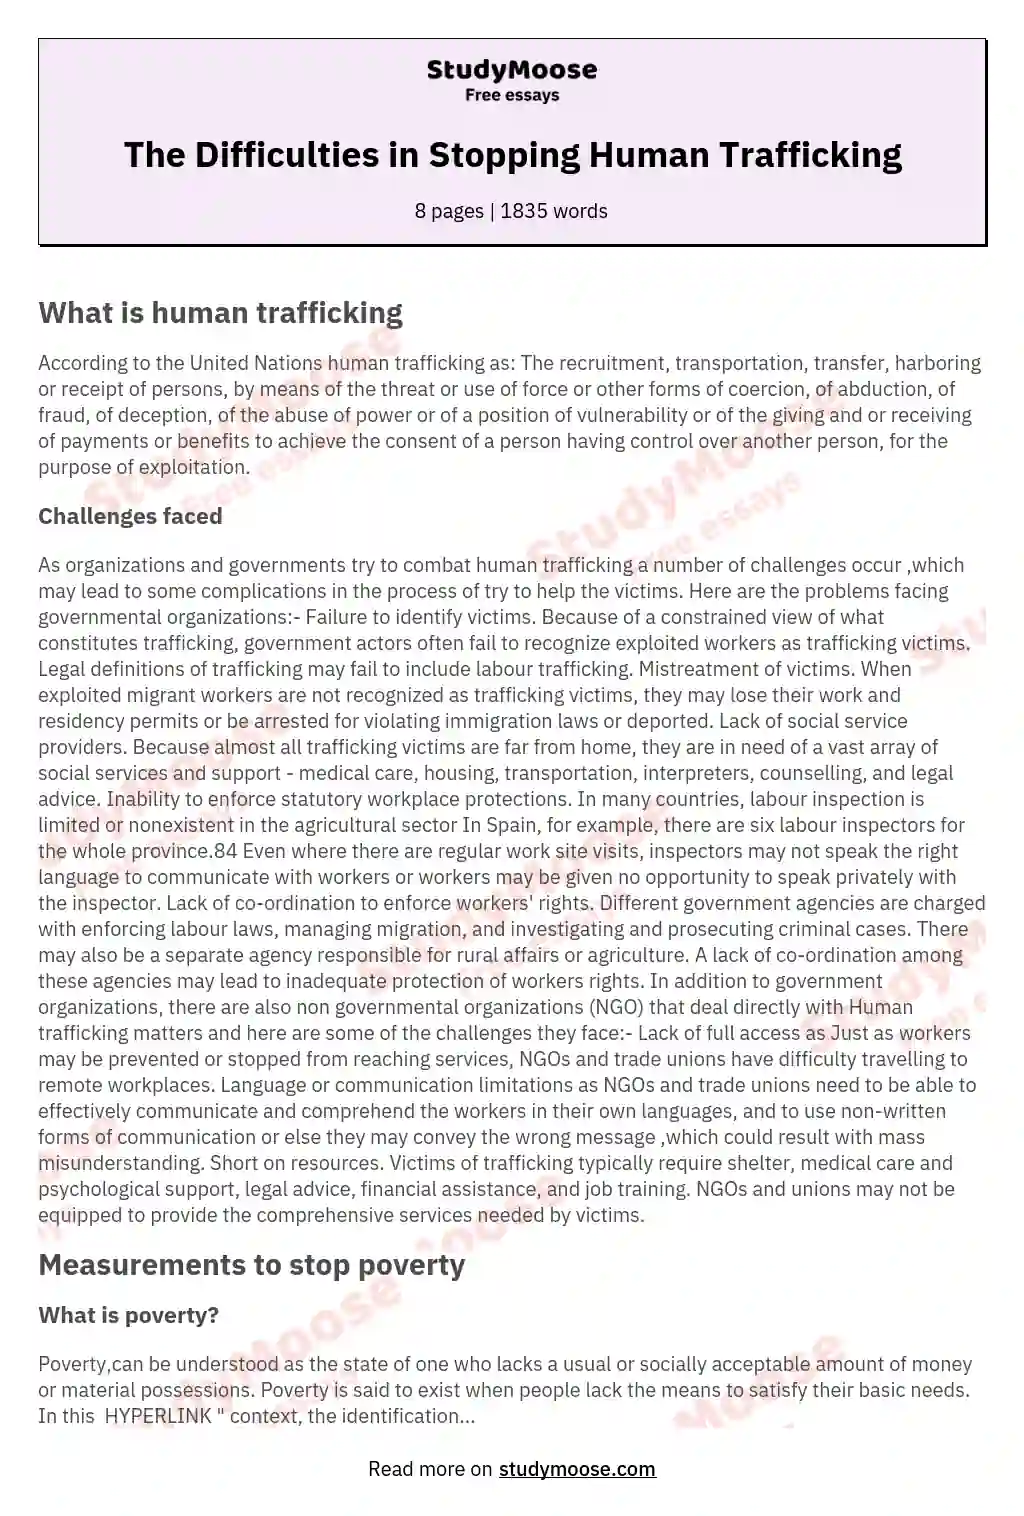 The Difficulties in Stopping Human Trafficking essay